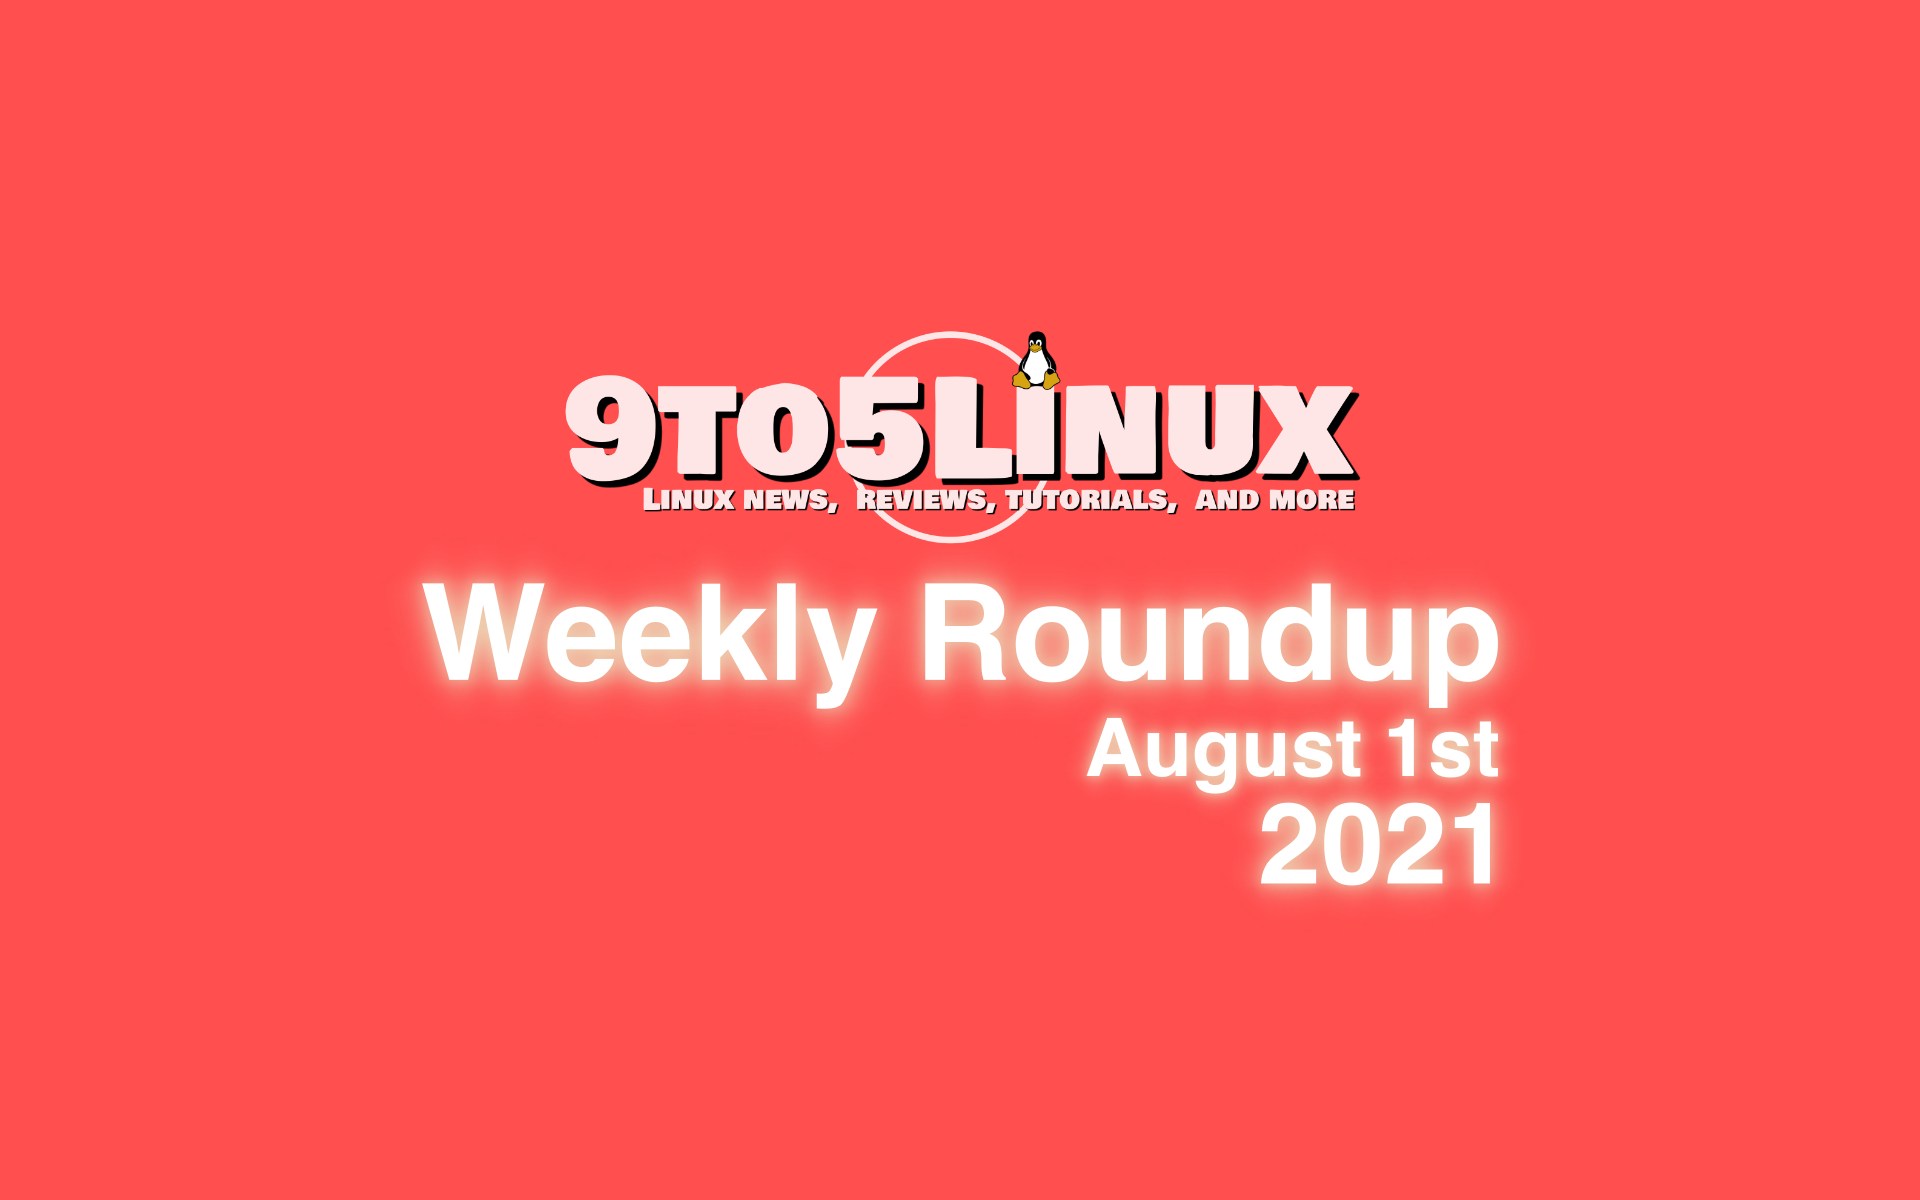 9to5Linux Weekly Roundup: August 1st, 2021